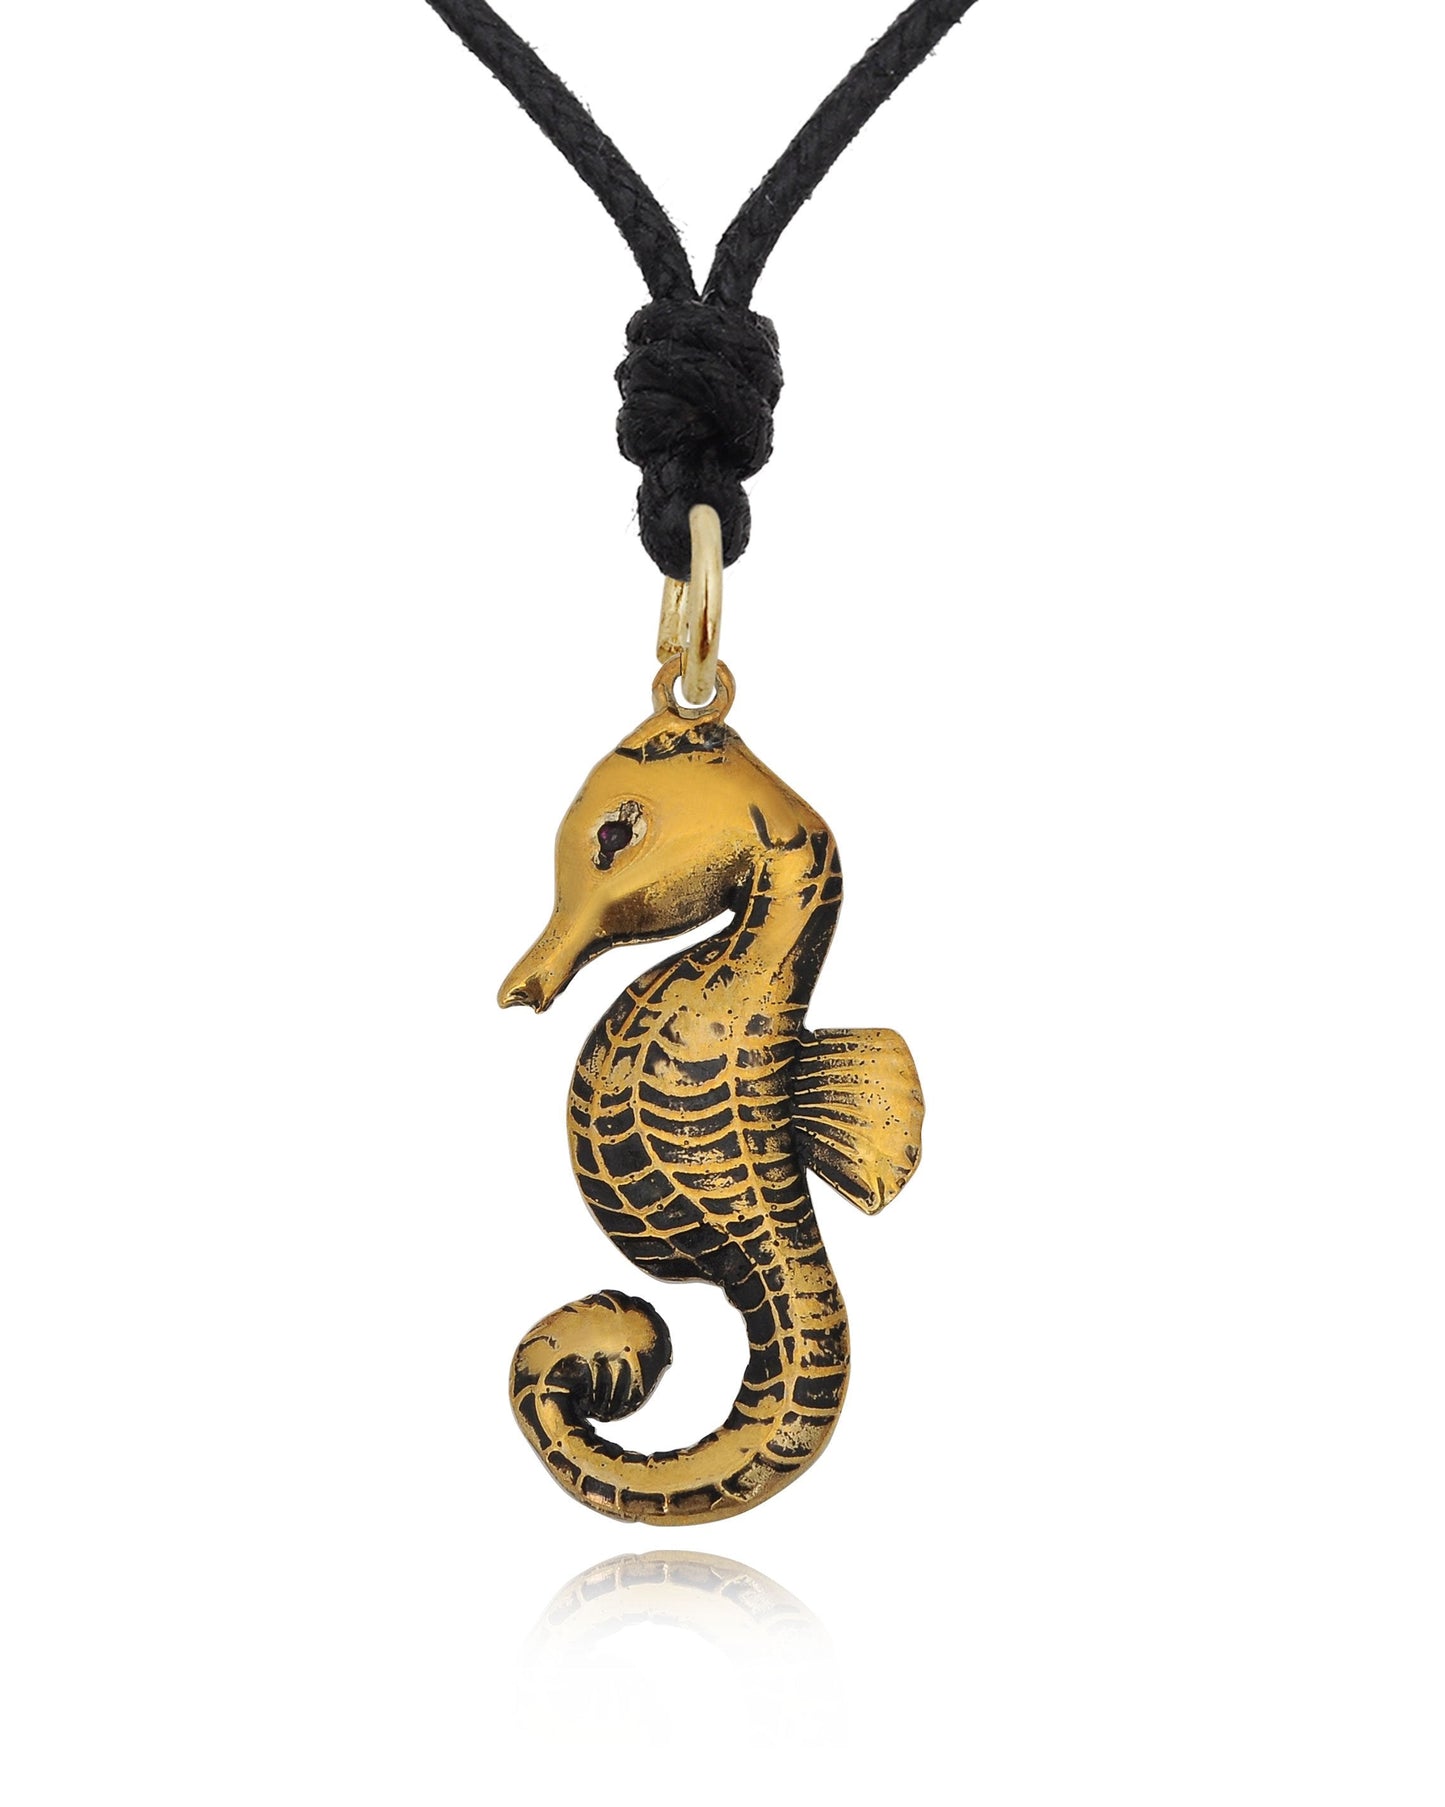 Sea Horse Ocean Silver Pewter Gold Brass Charm Necklace Pendant Jewelry